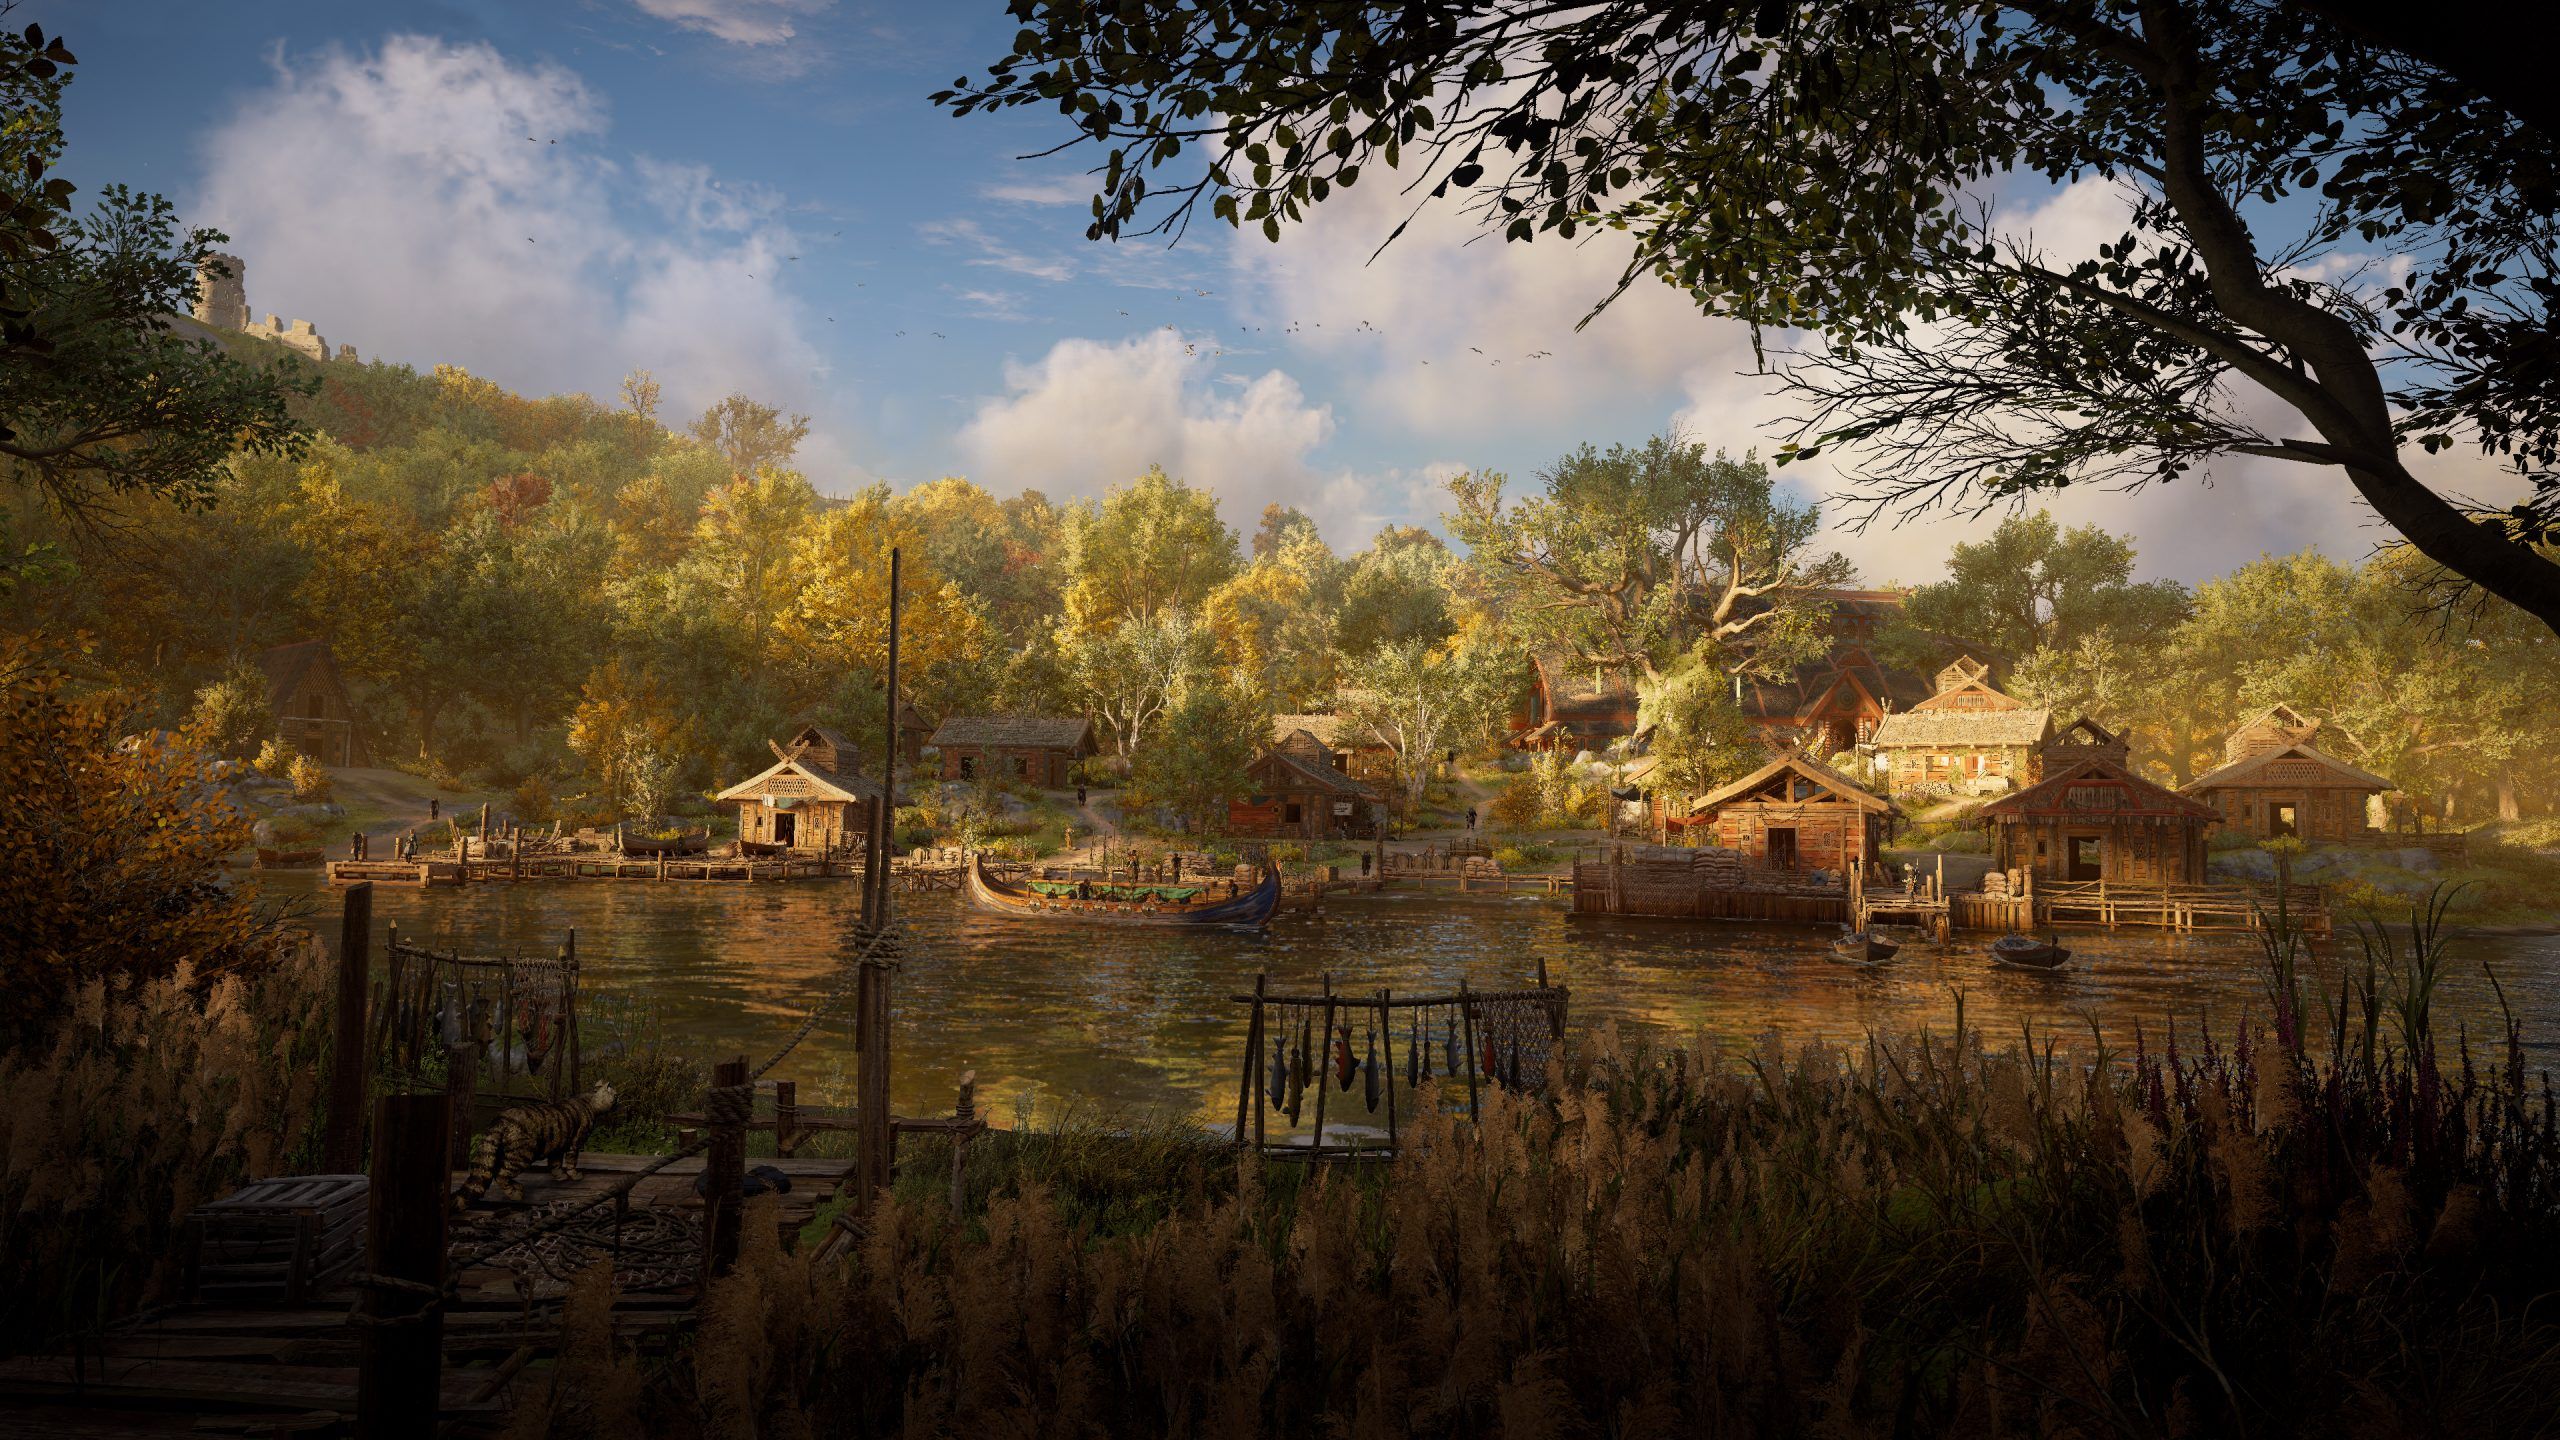 Assassin's Creed Valhalla Gets a Gallery of Gorgeous Screenshots